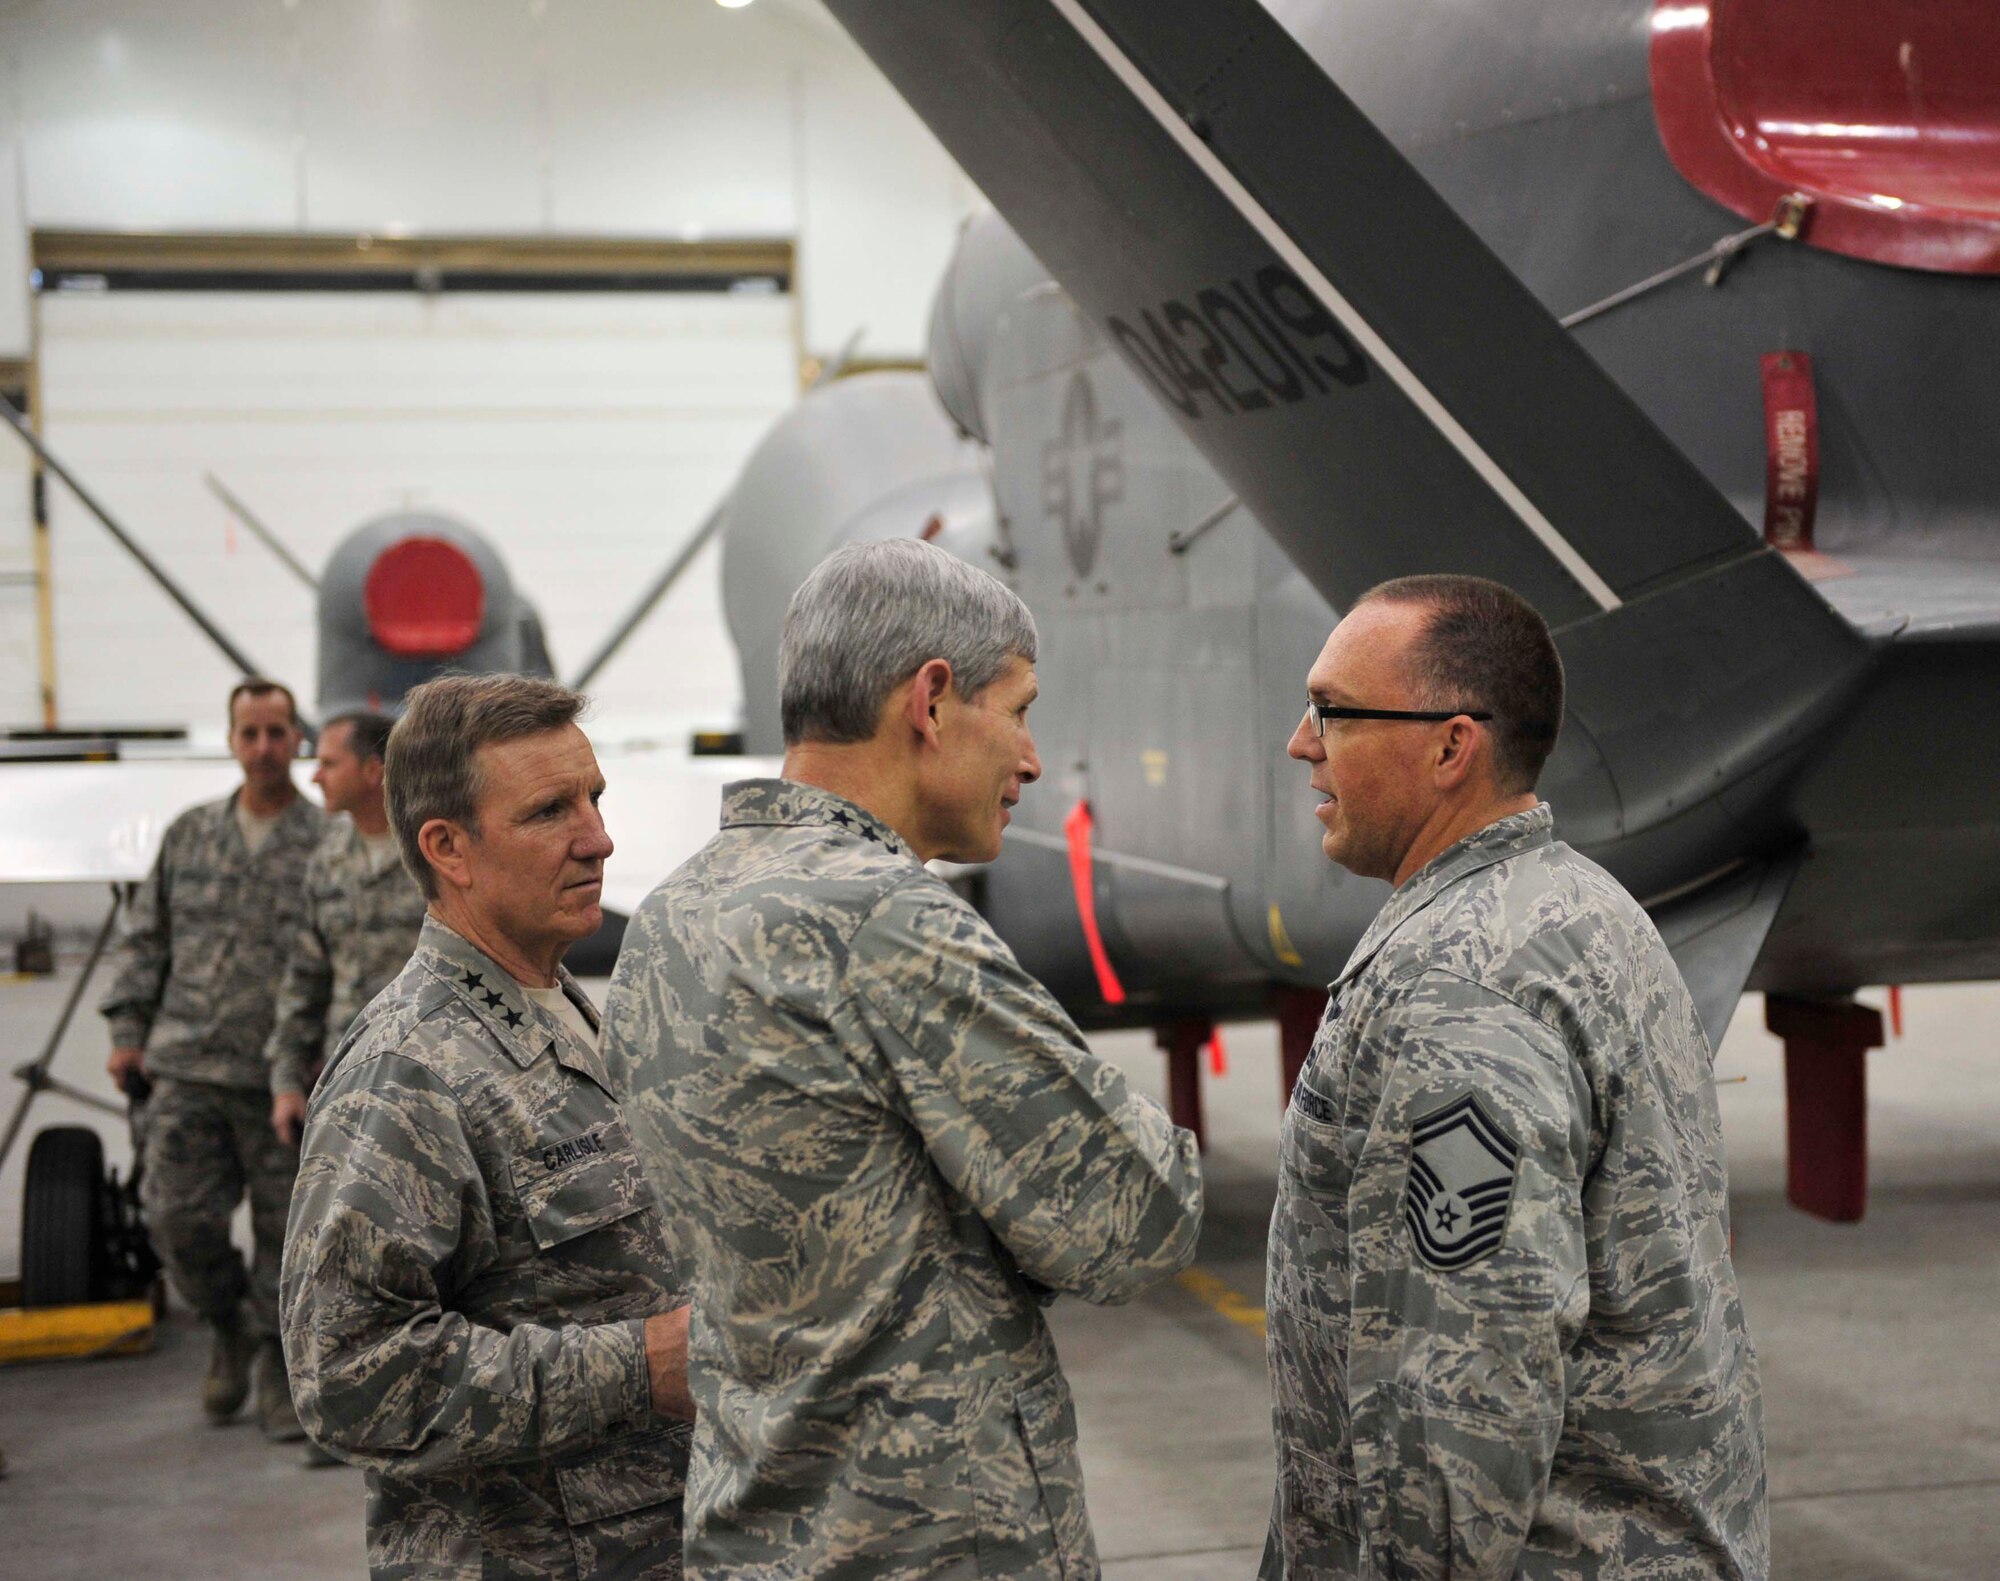 Air Force Chief of Staff Gen. Norton Schwartz and Lt. Gen. Herbert Carlisle,
the Air Force deputy chief of staff for operations, plans and requirements,
talk with  Senior Master Sgt. Christian Cahalan from the 380th Expeditionary
Aircraft Maintenance Squadron during a visit to the 380th Air Expeditionary
Wing Nov. 14, 2011. The chief of staff visited Airmen throughout the U.S.
Central Command area of responsibility in conjunction with attending the
Dubai International Air Chiefs Conference.  Cahalan is the superintendent
for the RQ-4 Global Hawk aircraft maintenance unit.  His hometown is Sioux
Falls, S.D.  (U.S. Air Force photo/Tech. Sgt. Patrick Mitchell)
